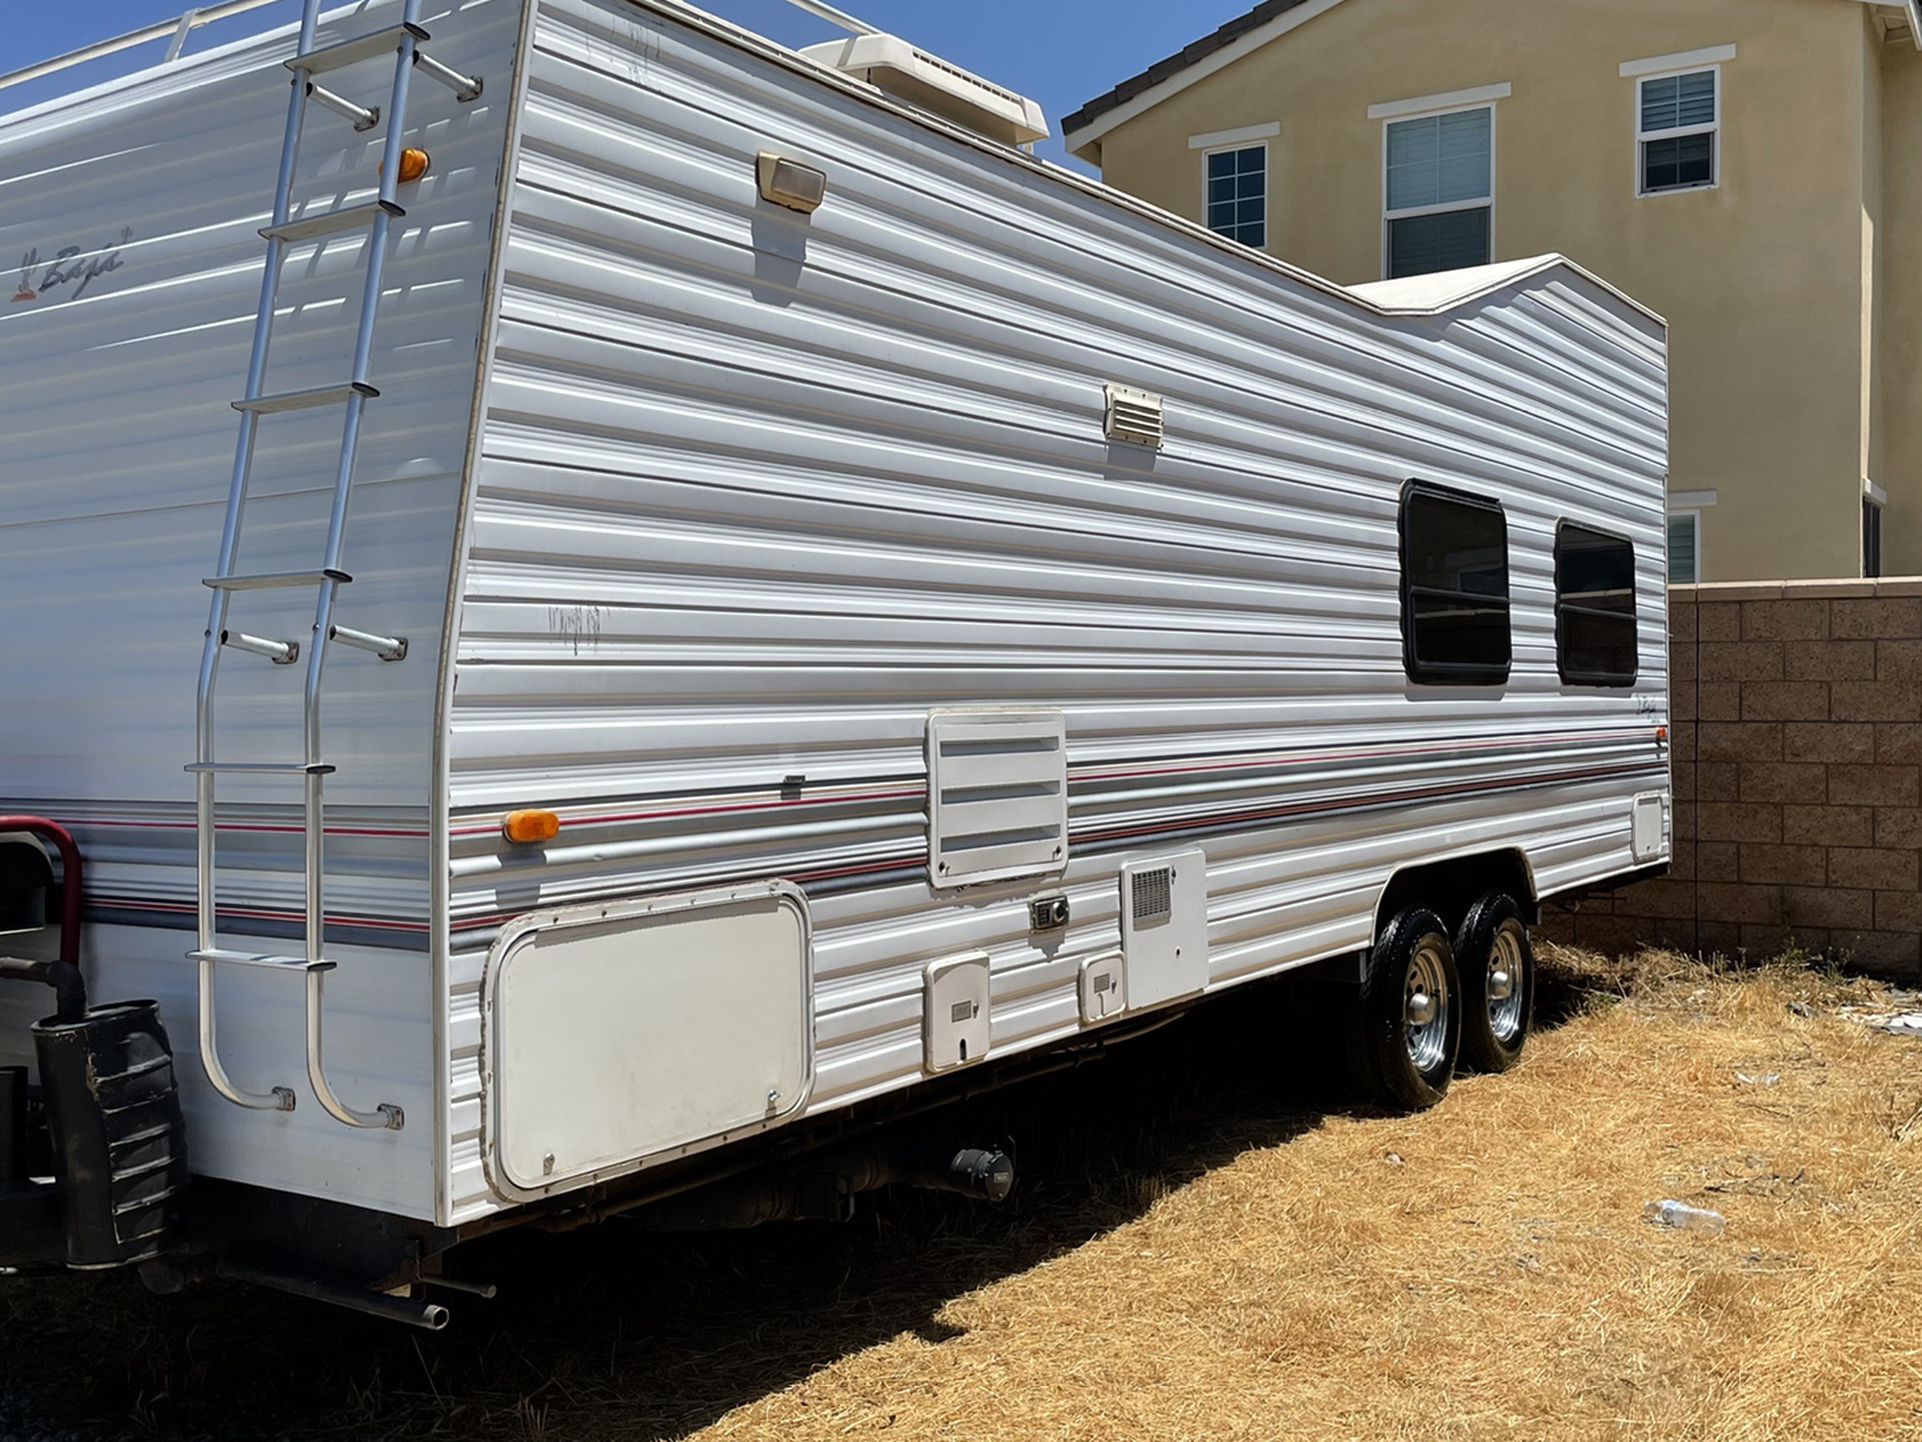 Photo 28FT Baja Limited Toy hauler travel trailer 16feet cargo space it well fit anything Im here awesome Everything works nice and clean Nice ge